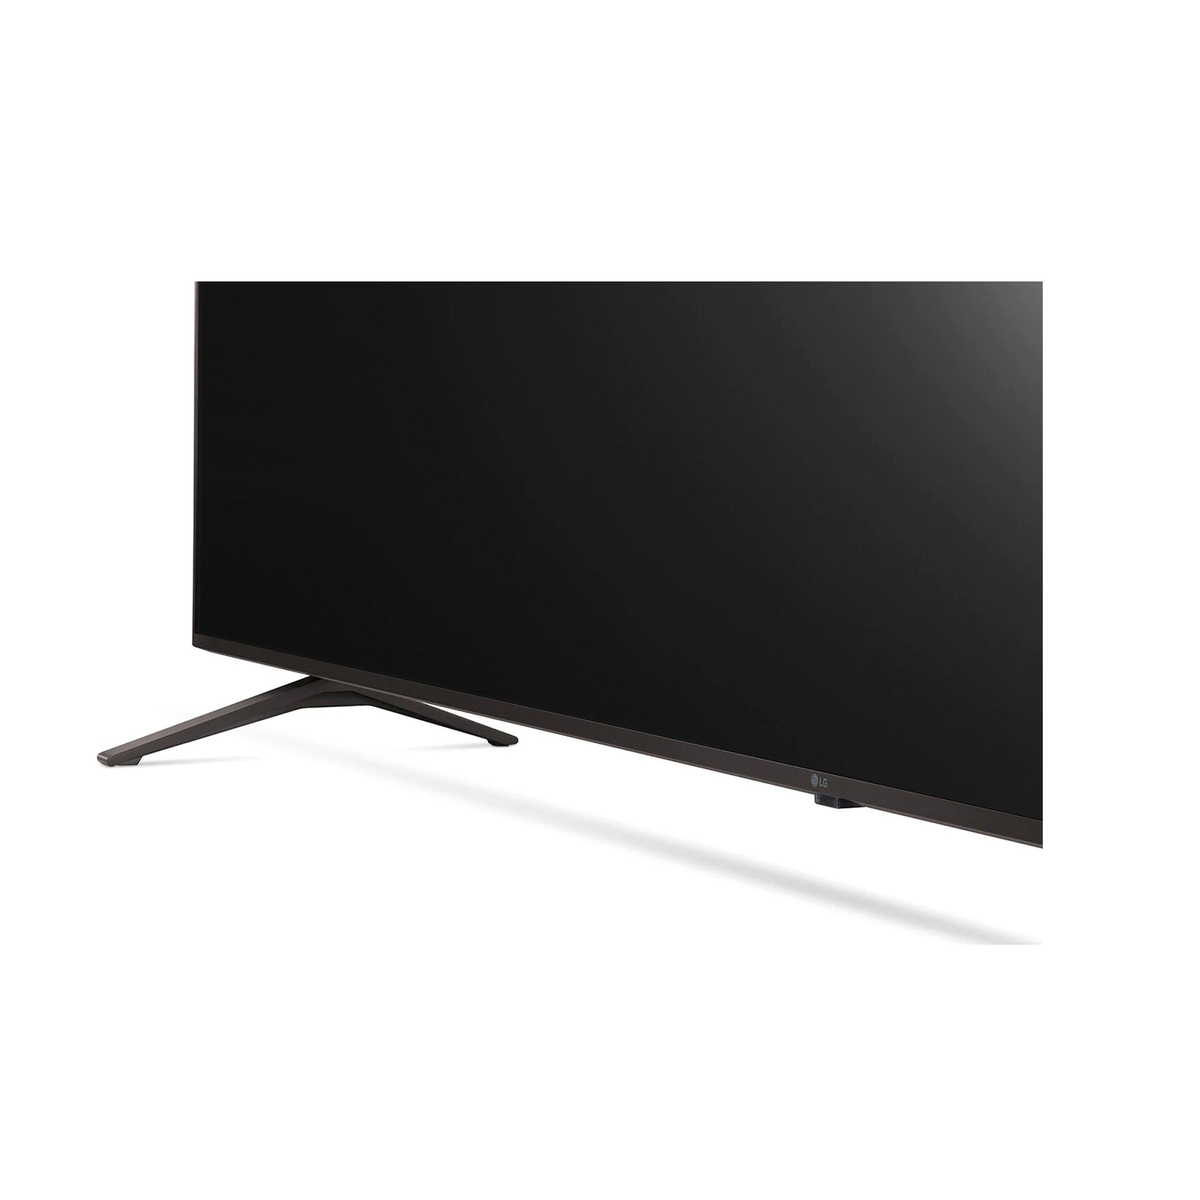 LG UHD 4K TV 86 Inch UP80 Series NEW 2021 Cinema Screen Design 4K Cinema HDR webOS Smart with ThinQ AI